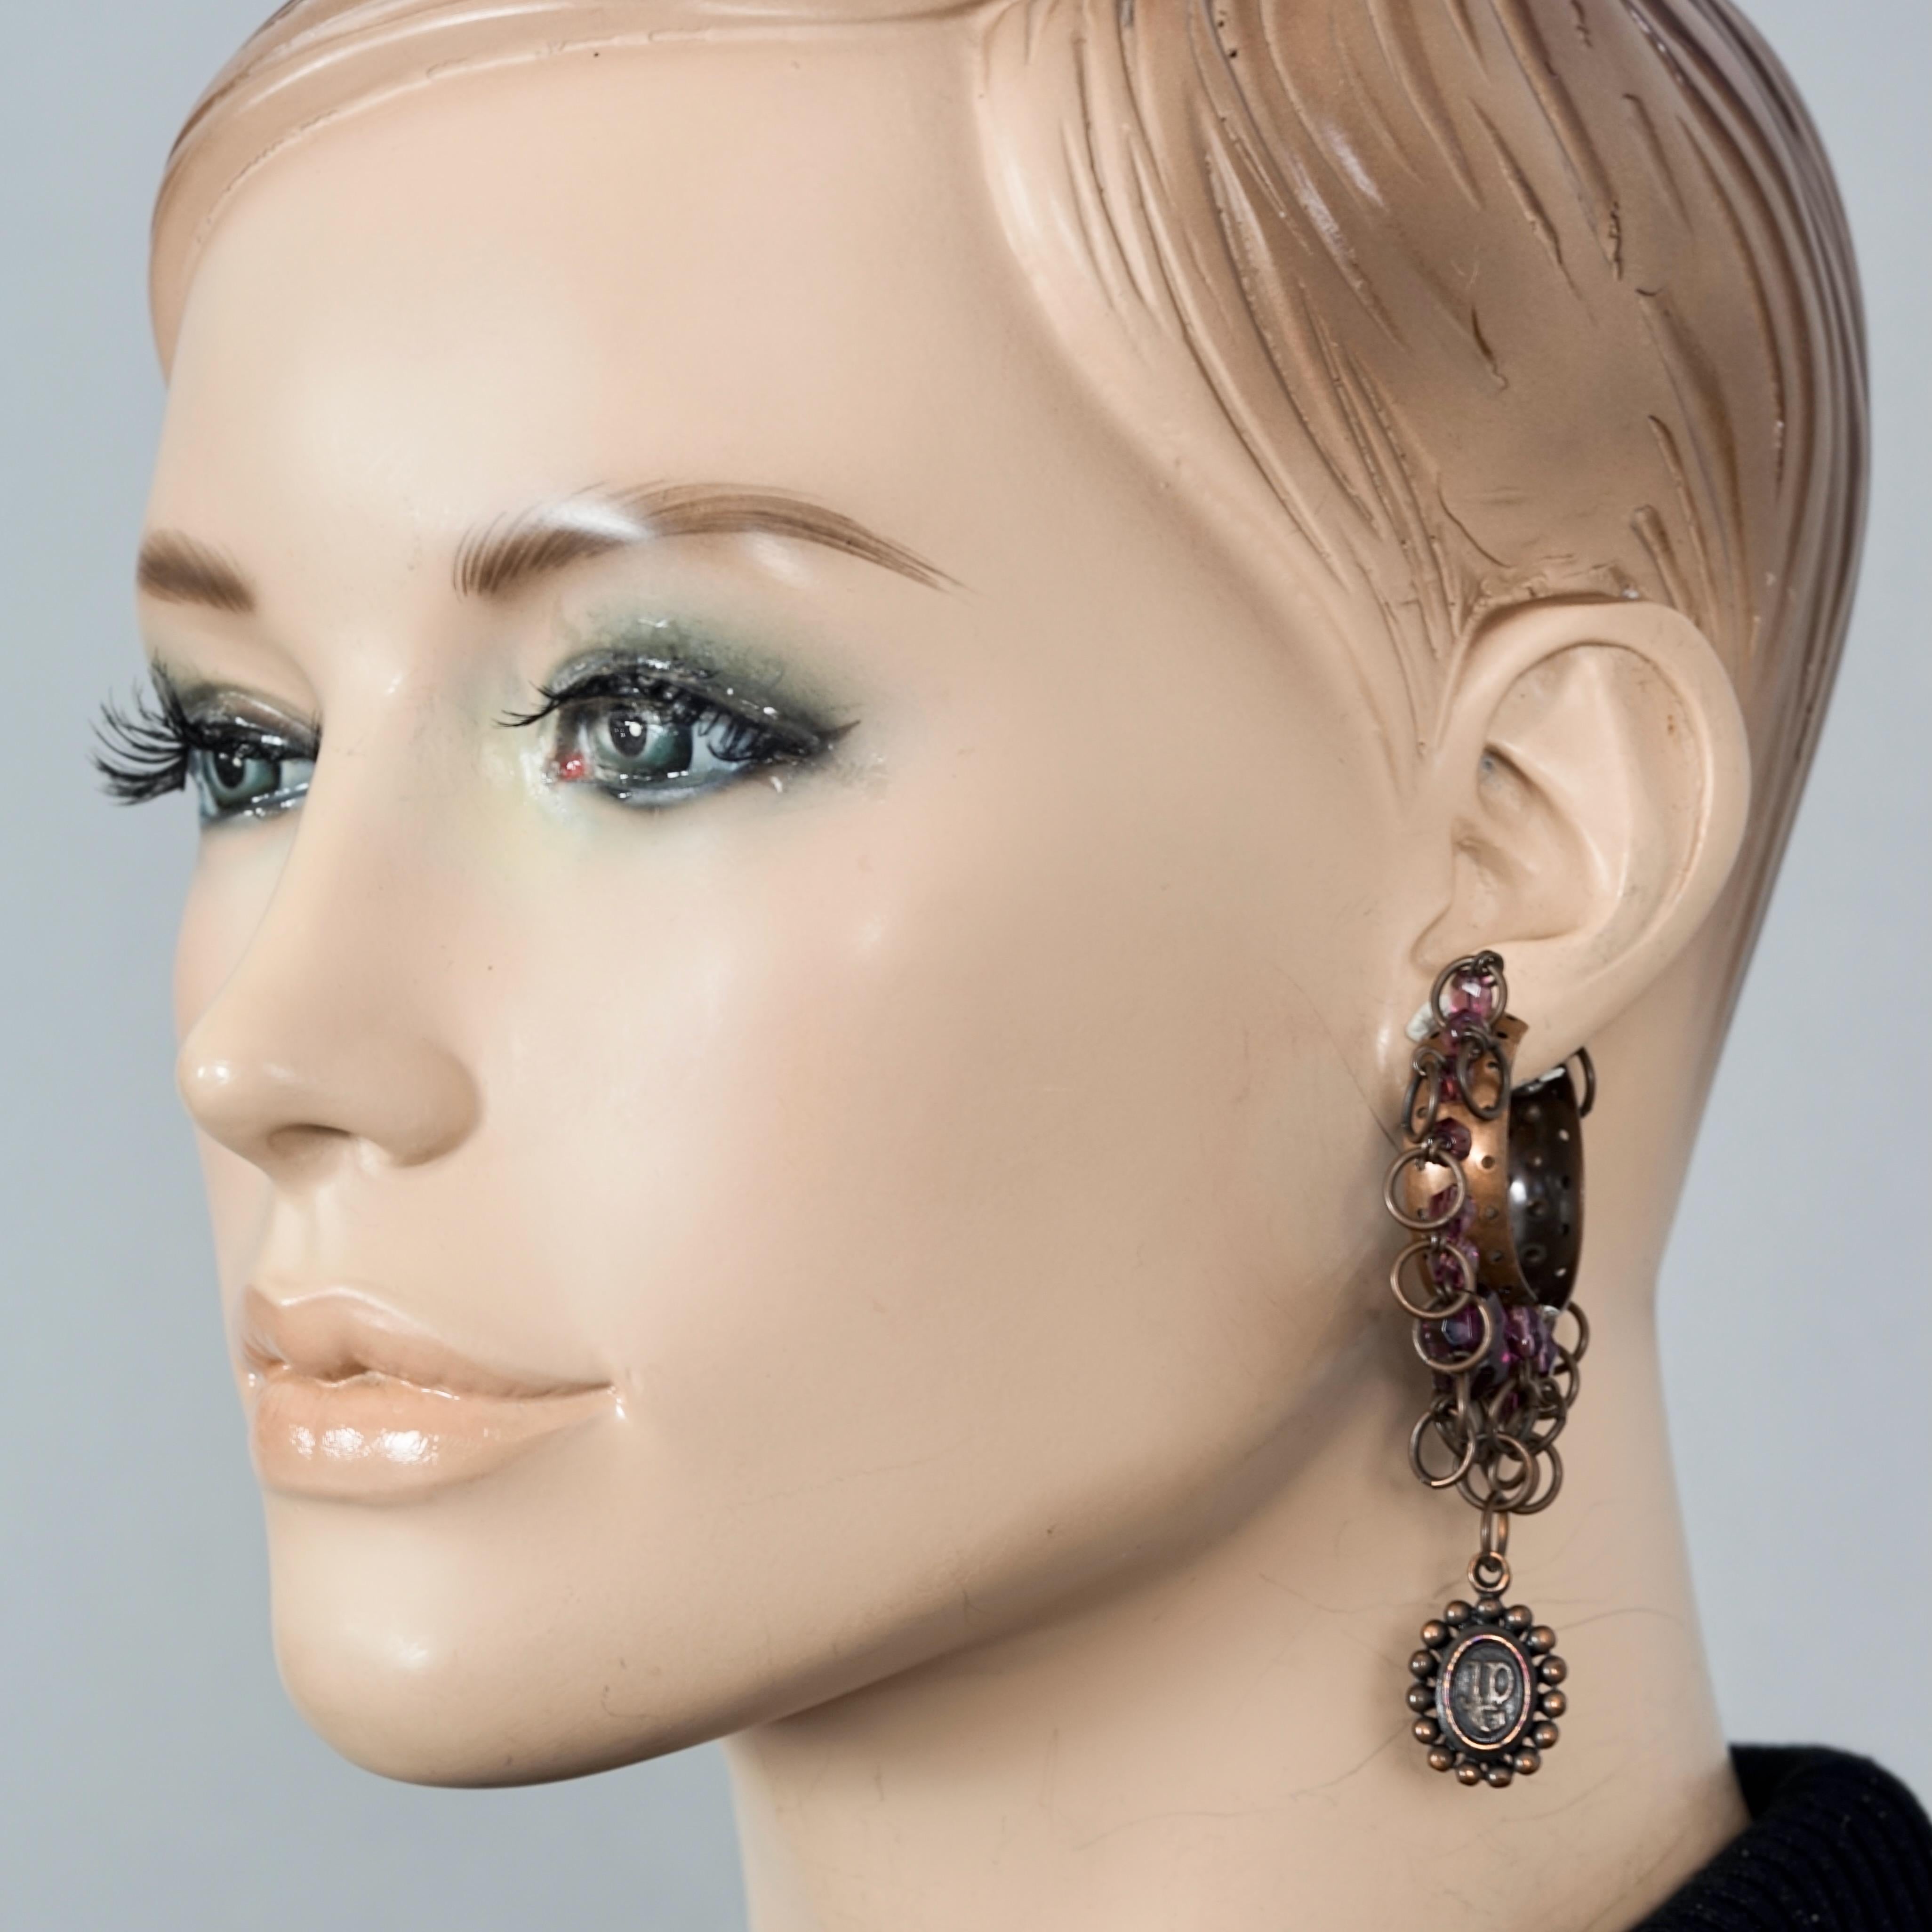 Vintage JEAN PAUL GAULTIER Tribal Creole Beaded Earrings

Measurements:
Height: 3.15 inches (8 cms)
Diameter: 1.97 inches (5 cms)
Weight per Earring: 16 grams

Features:
- 100% Authentic JEAN PAUL GAULTIER.
- Creole earrings in tribal motif with